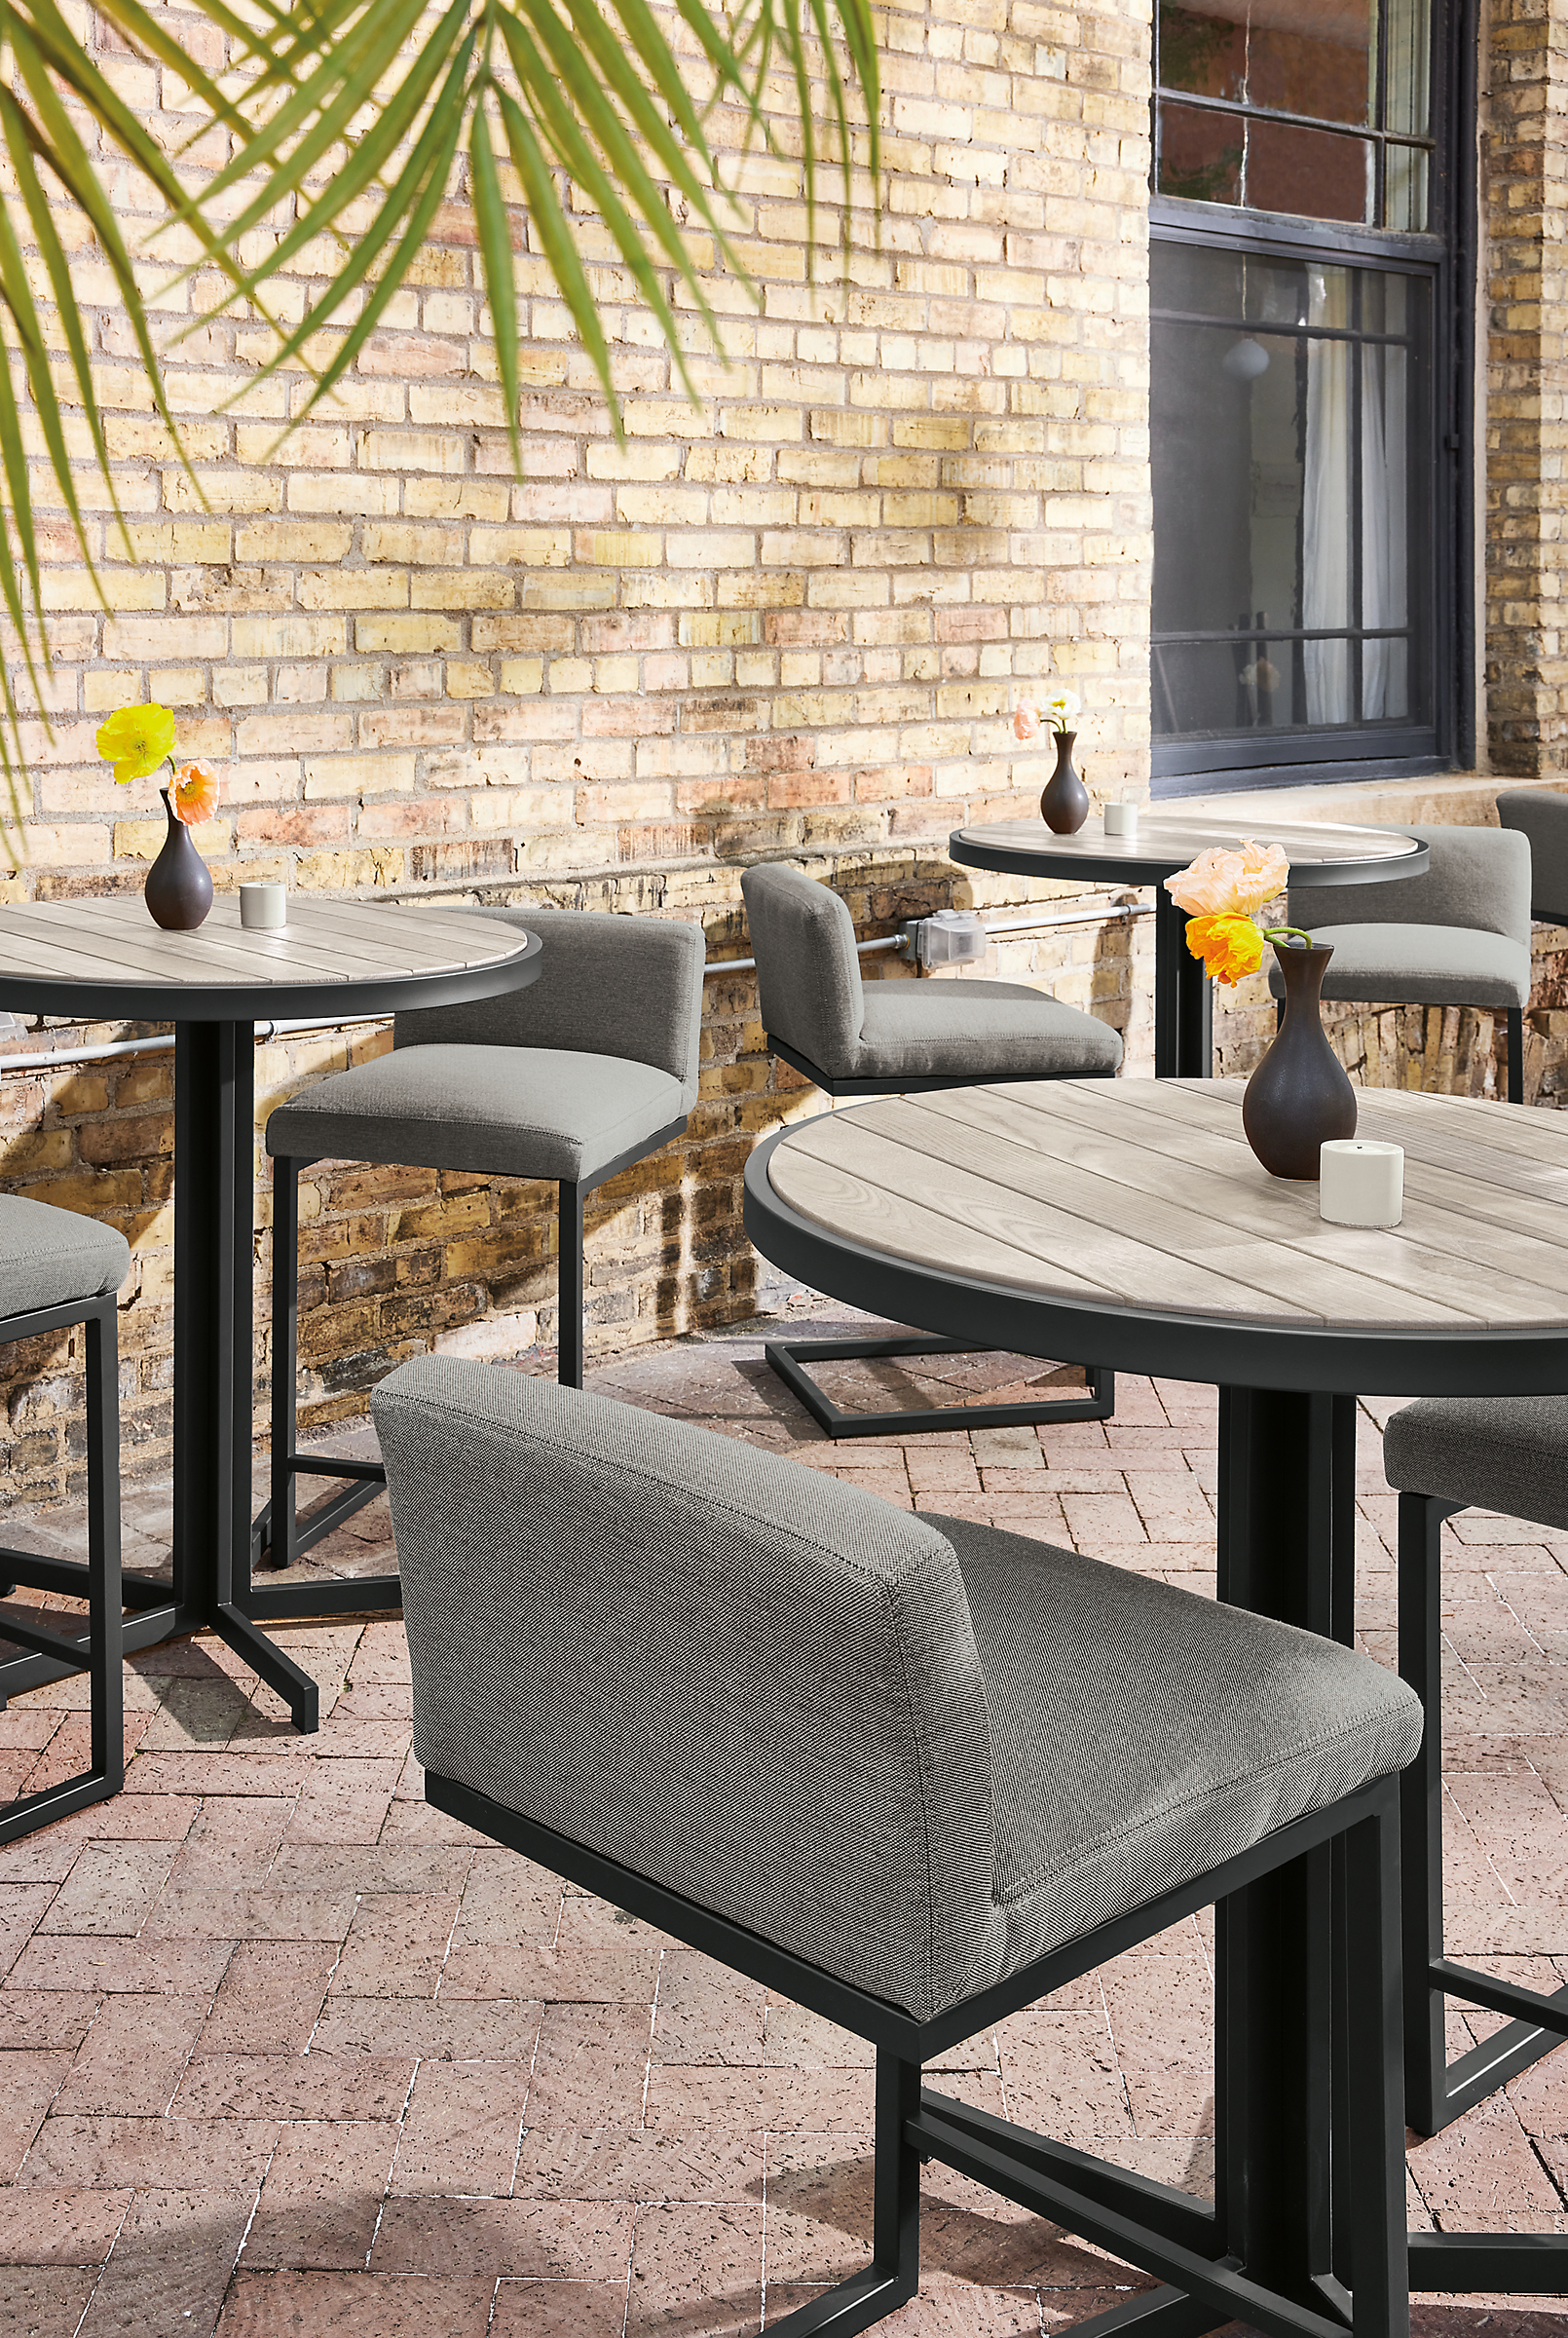 Outdoor dining space with montego round counter tables in aged thermally modified ashand finn counter stools.